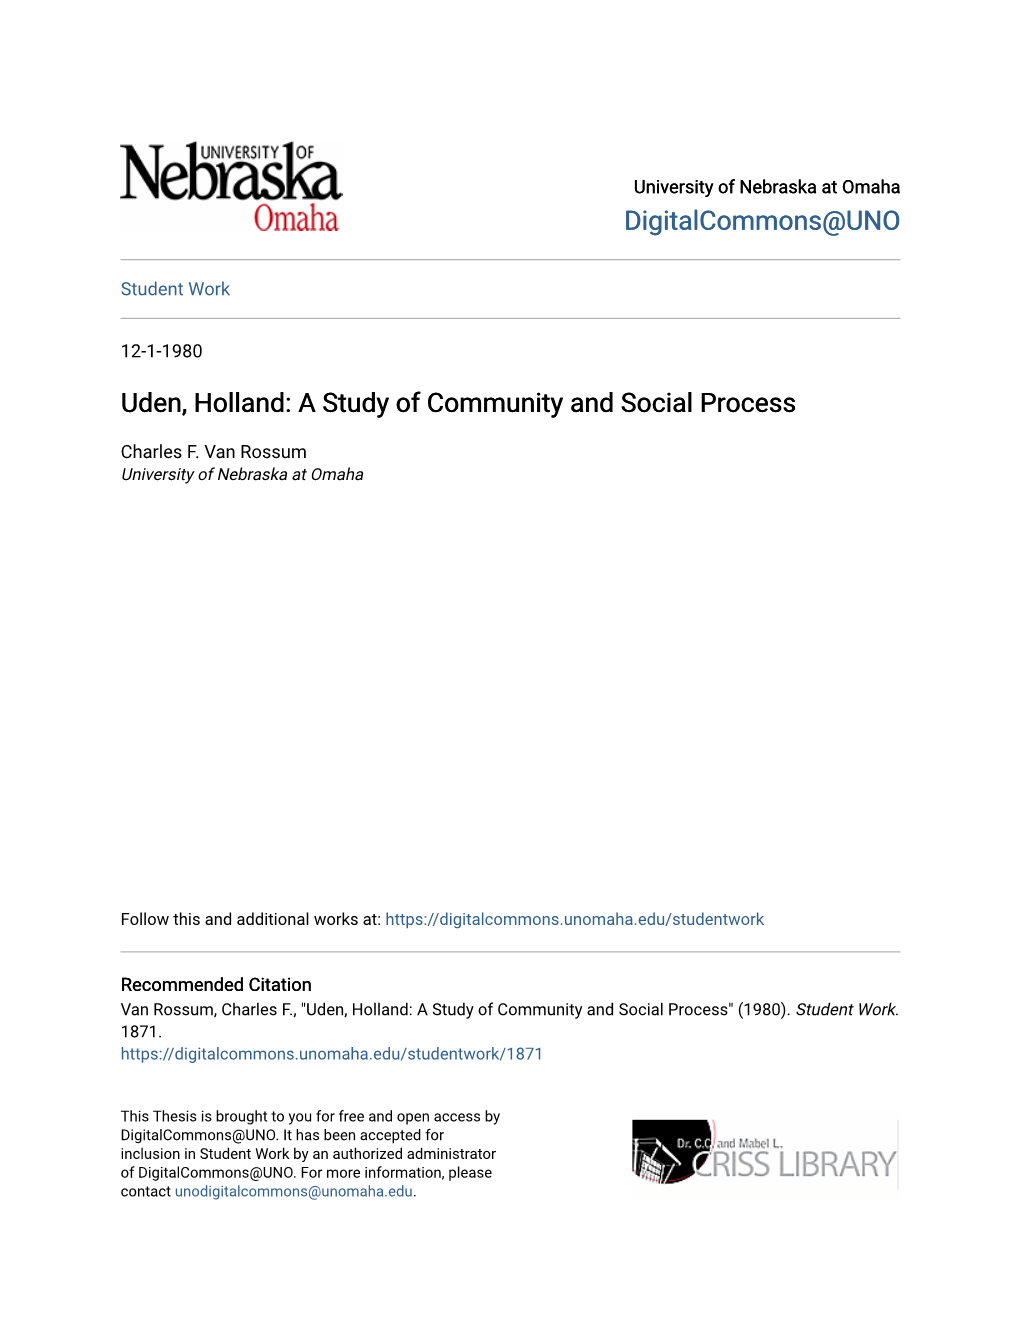 Uden, Holland: a Study of Community and Social Process